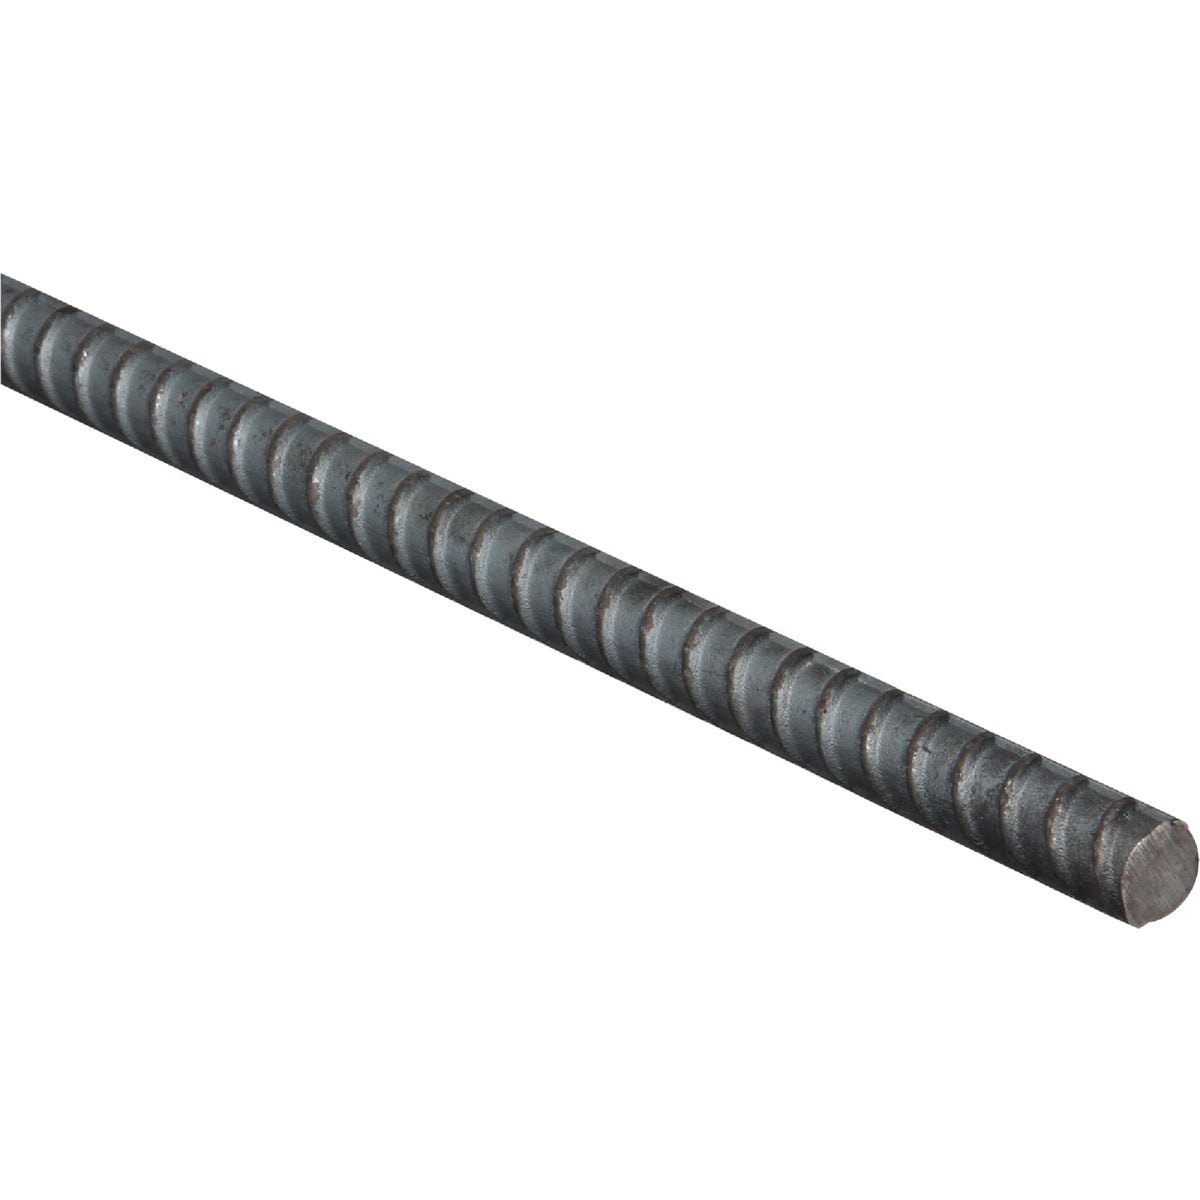 Item 701402, Designed for reinforcing concrete &amp; for masonry structures and used as 